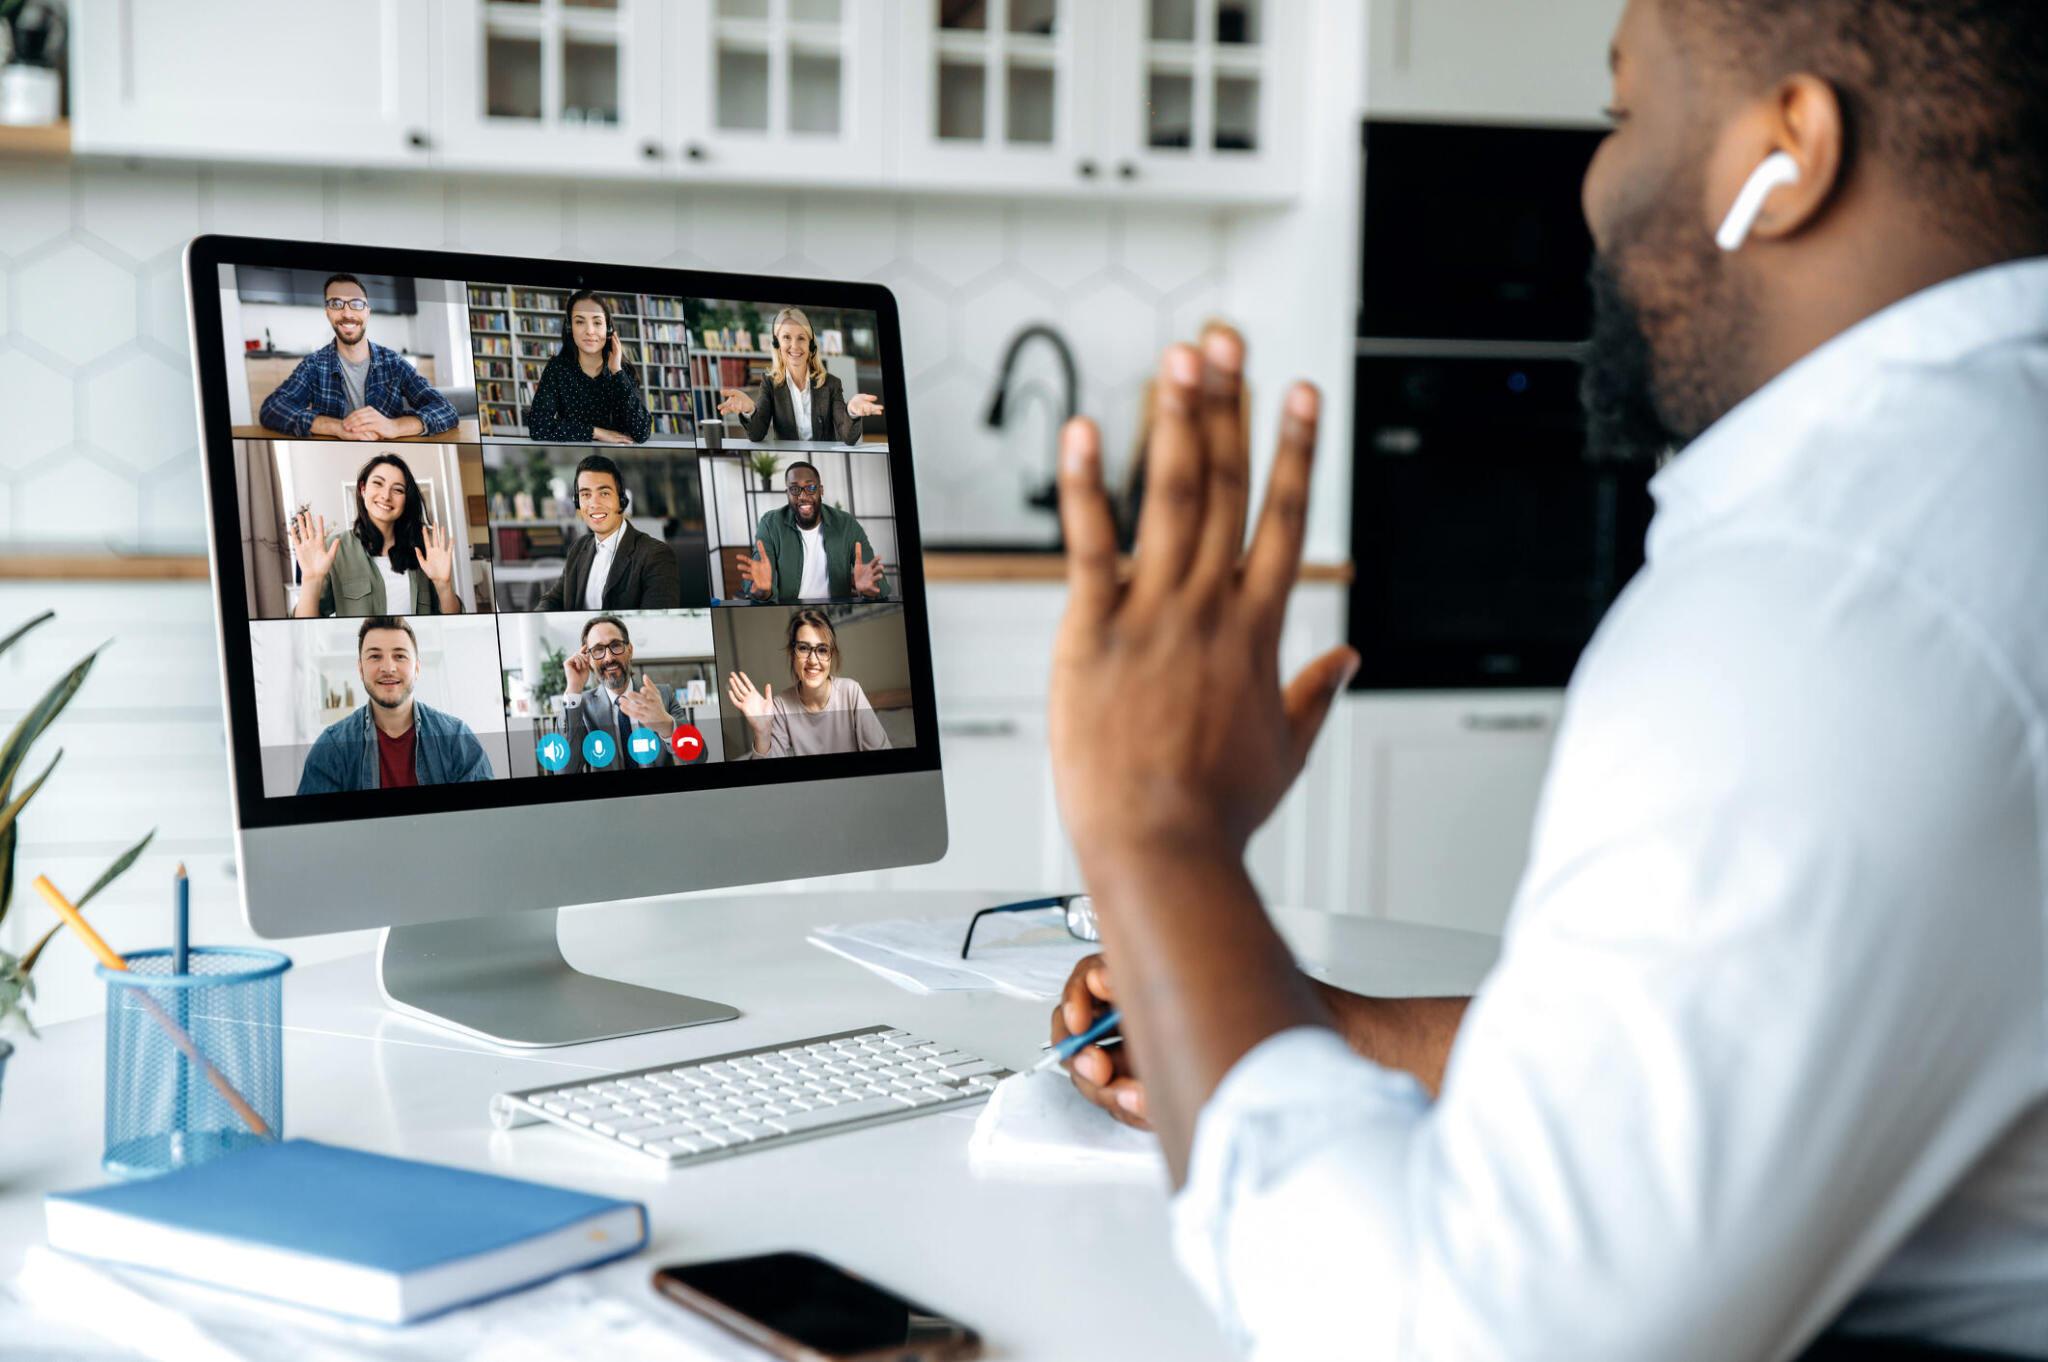 A remote worker collaborating with other participants on video conferencing on his computer and using an apple airpods